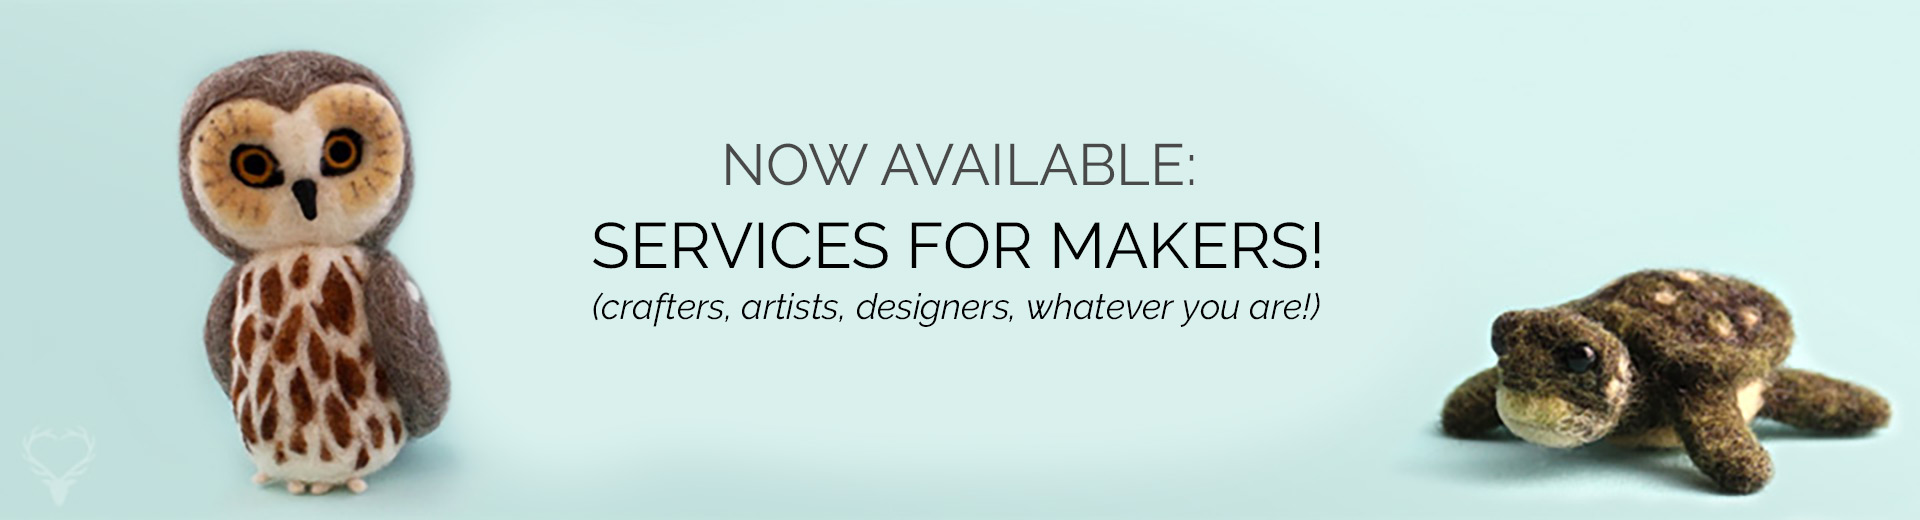 Services for Makers banner